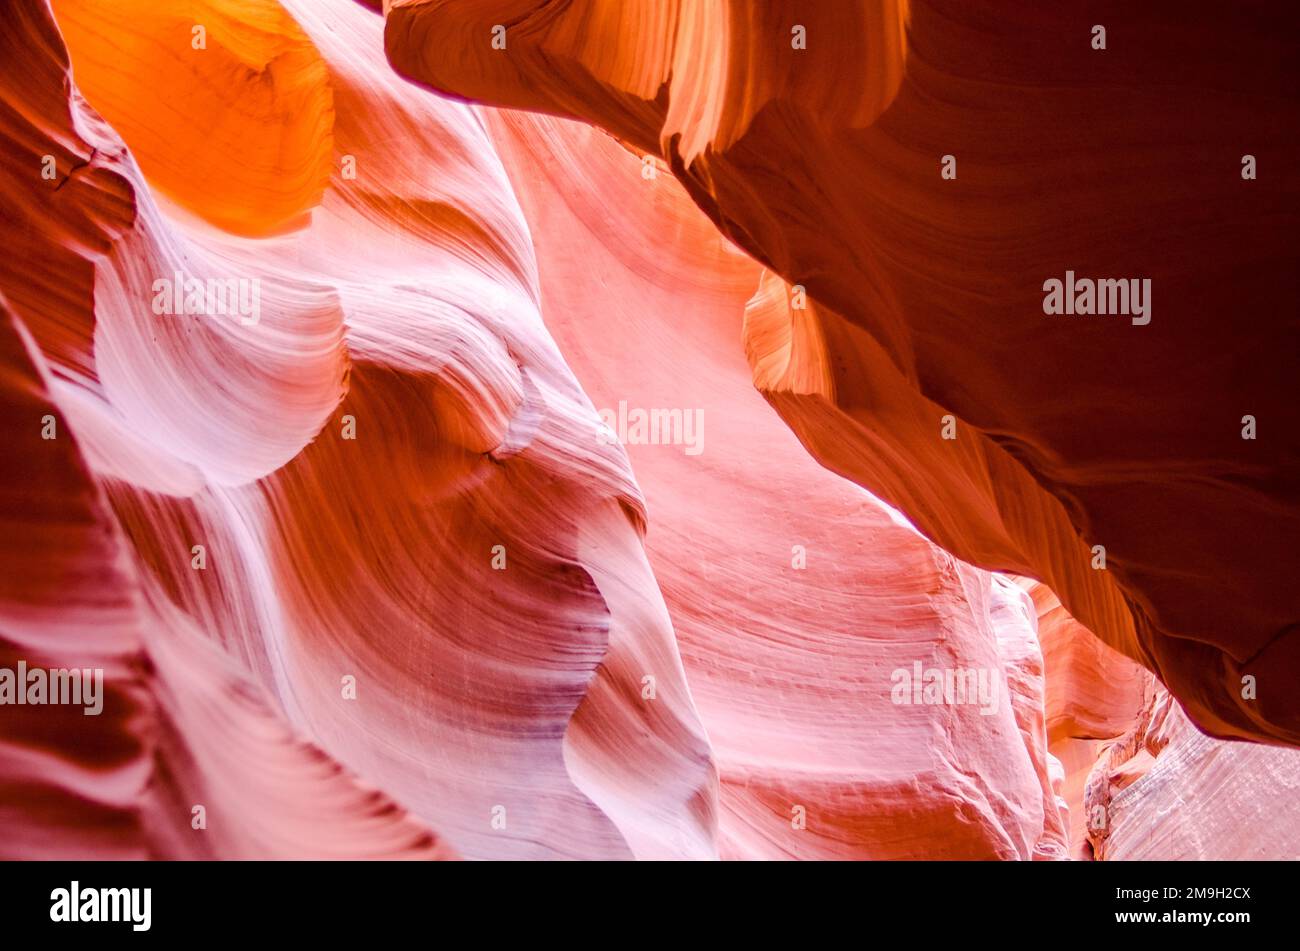 The beautifully smooth and red sandstone walls of Antelope Canyon in Arizona, USA Stock Photo